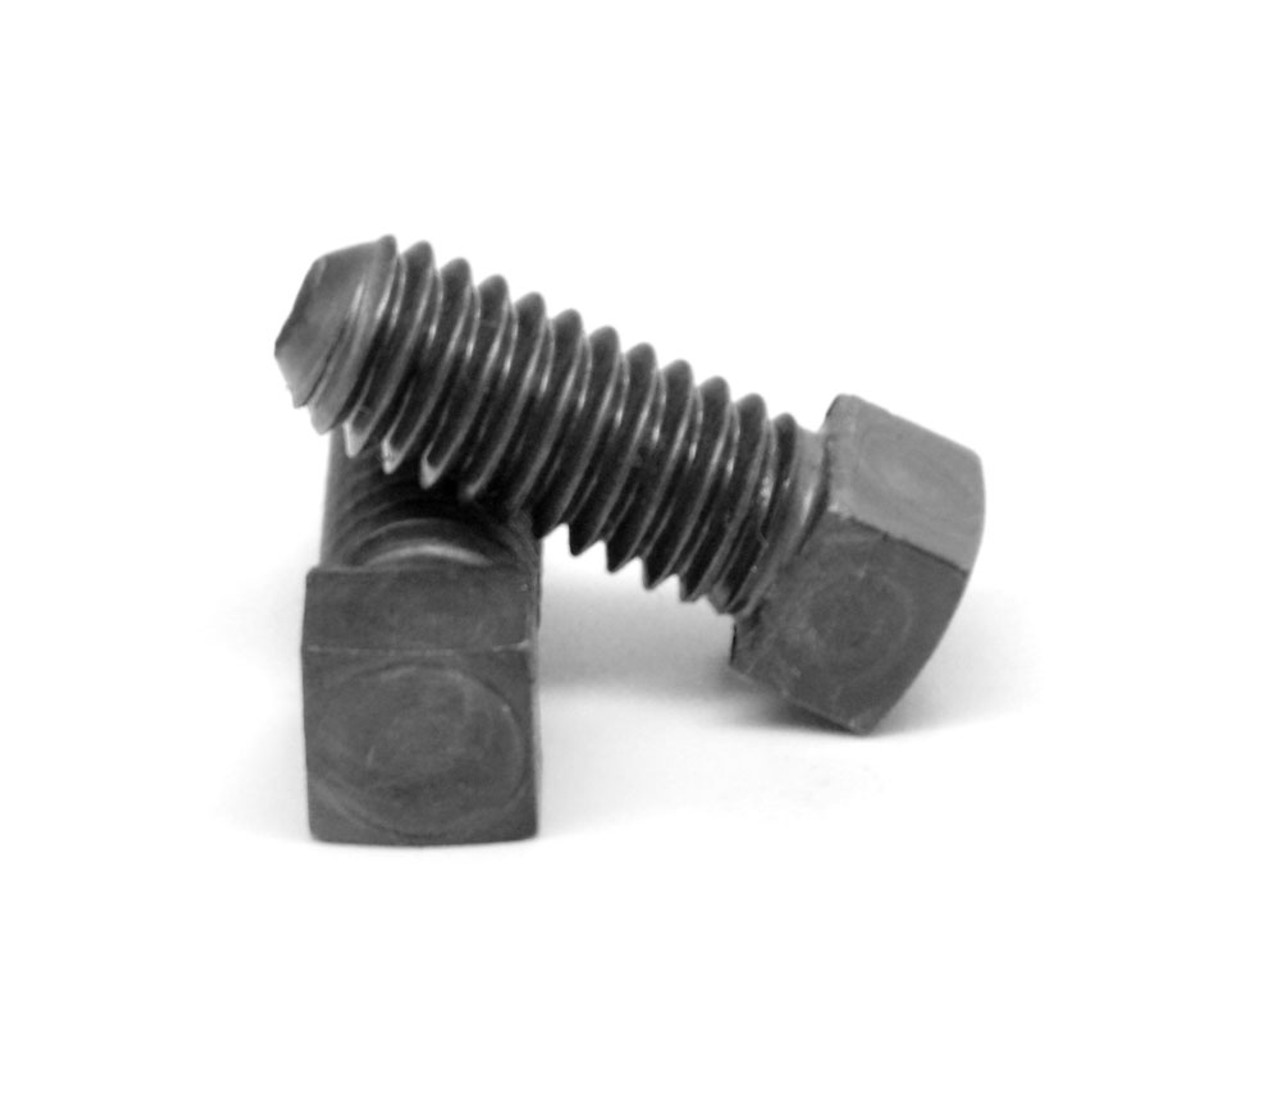 5/16"-24 x 1 1/4" (FT) Fine Thread Square Head Set Screw Cup Point Low Carbon Steel Case Hardened Plain Finish